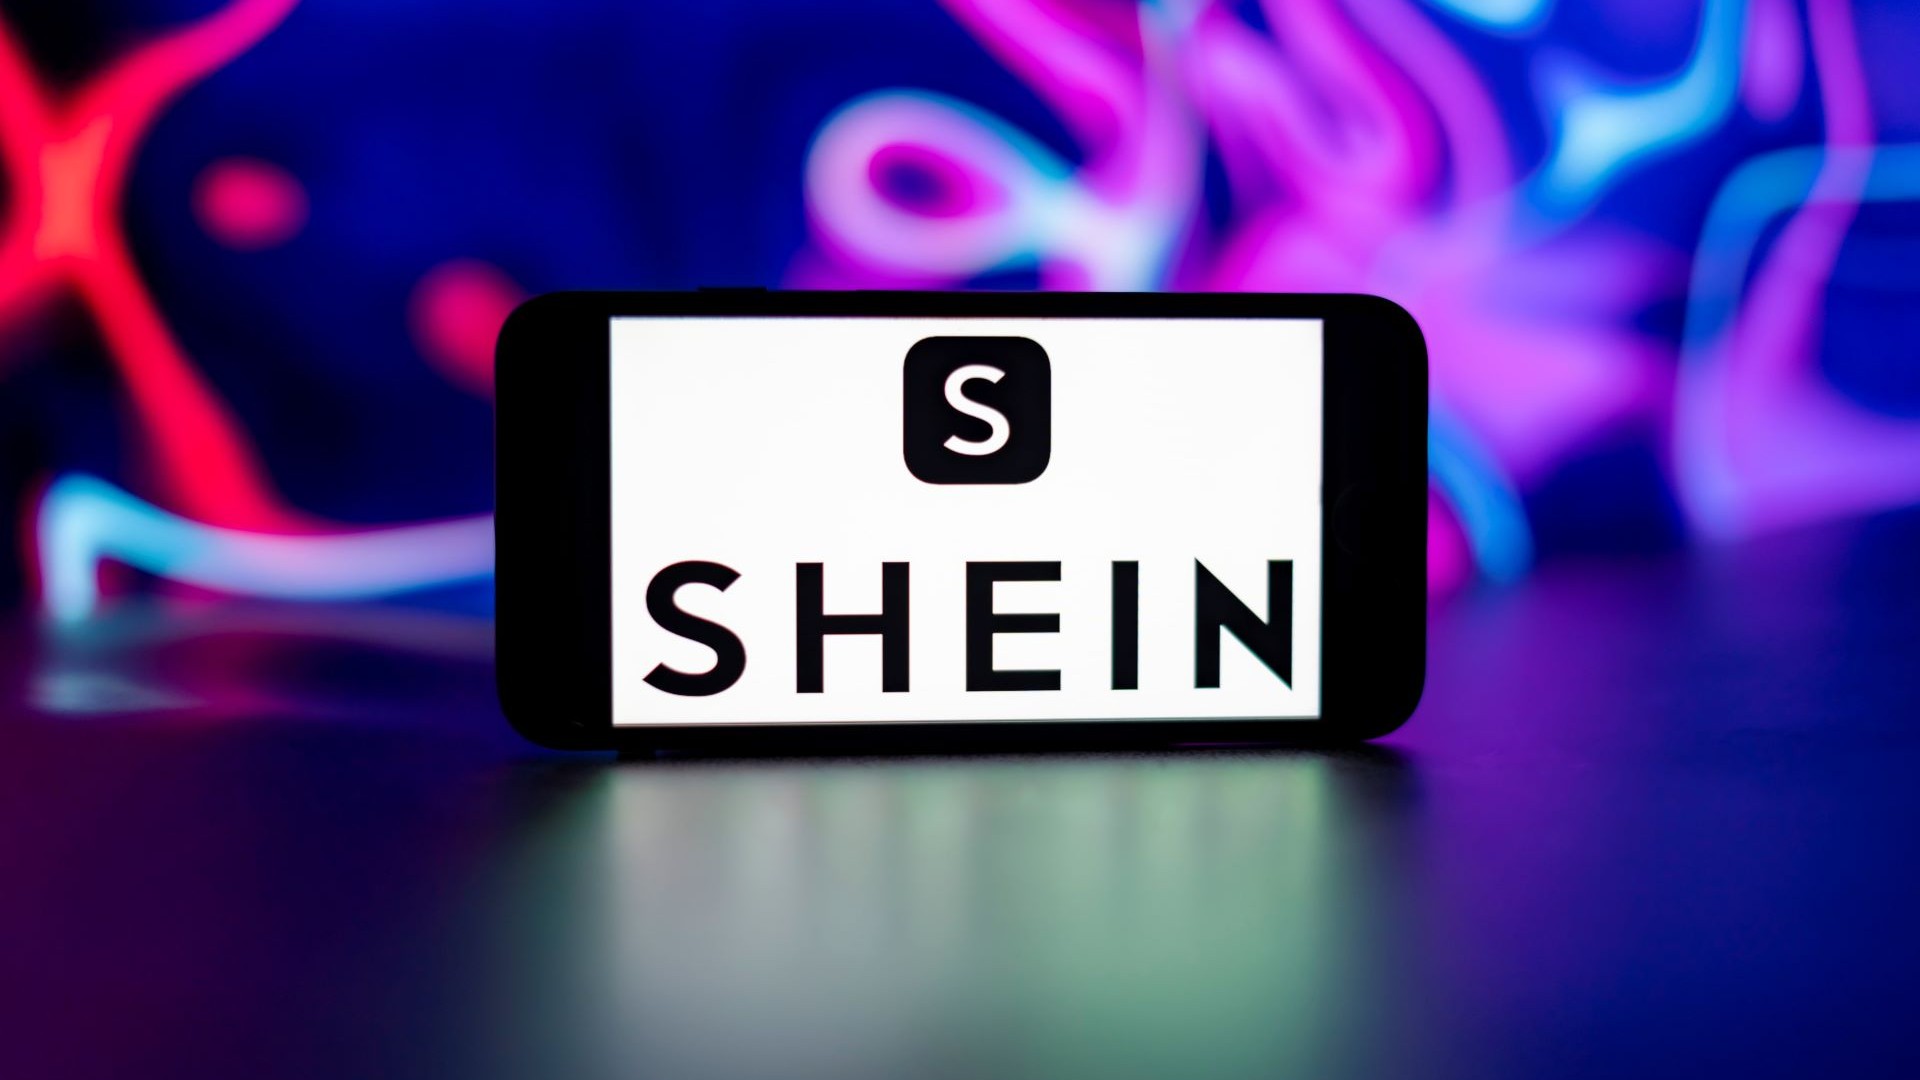 Fast-fashion giant Shein faces challenges in IPO plans